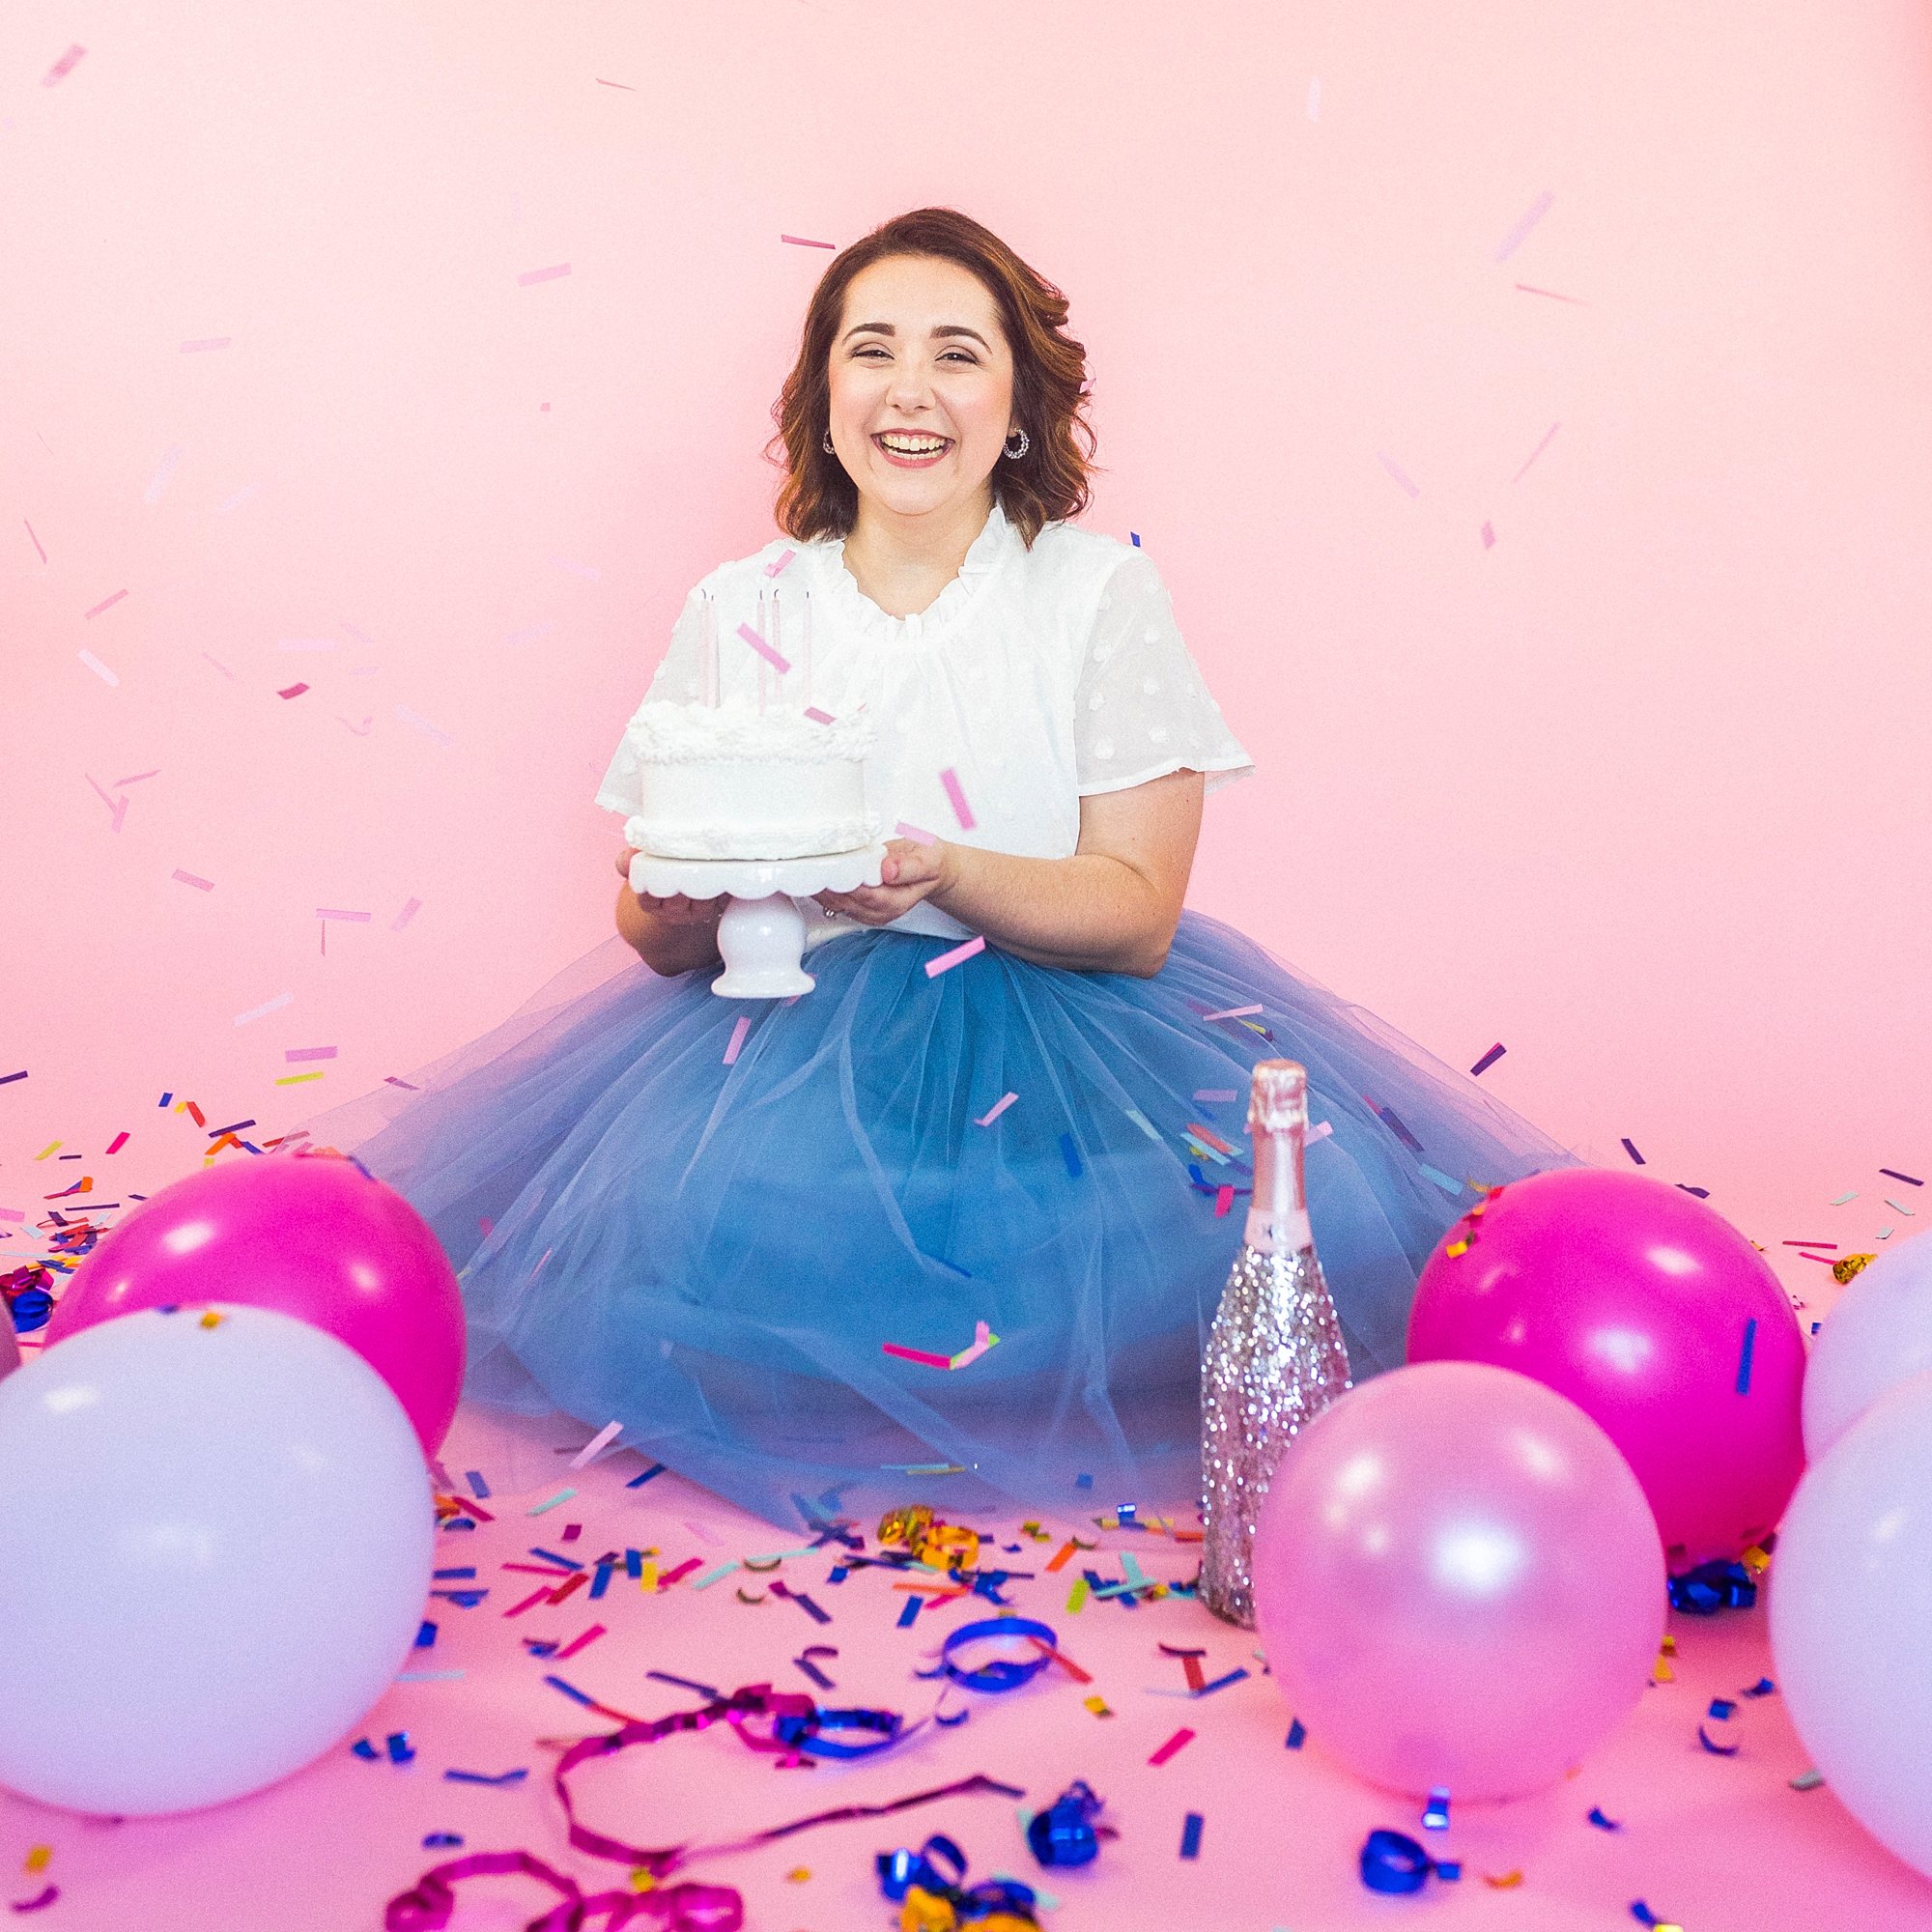 birthday girl holds cake on pink backdrop during 30th birthday portraits